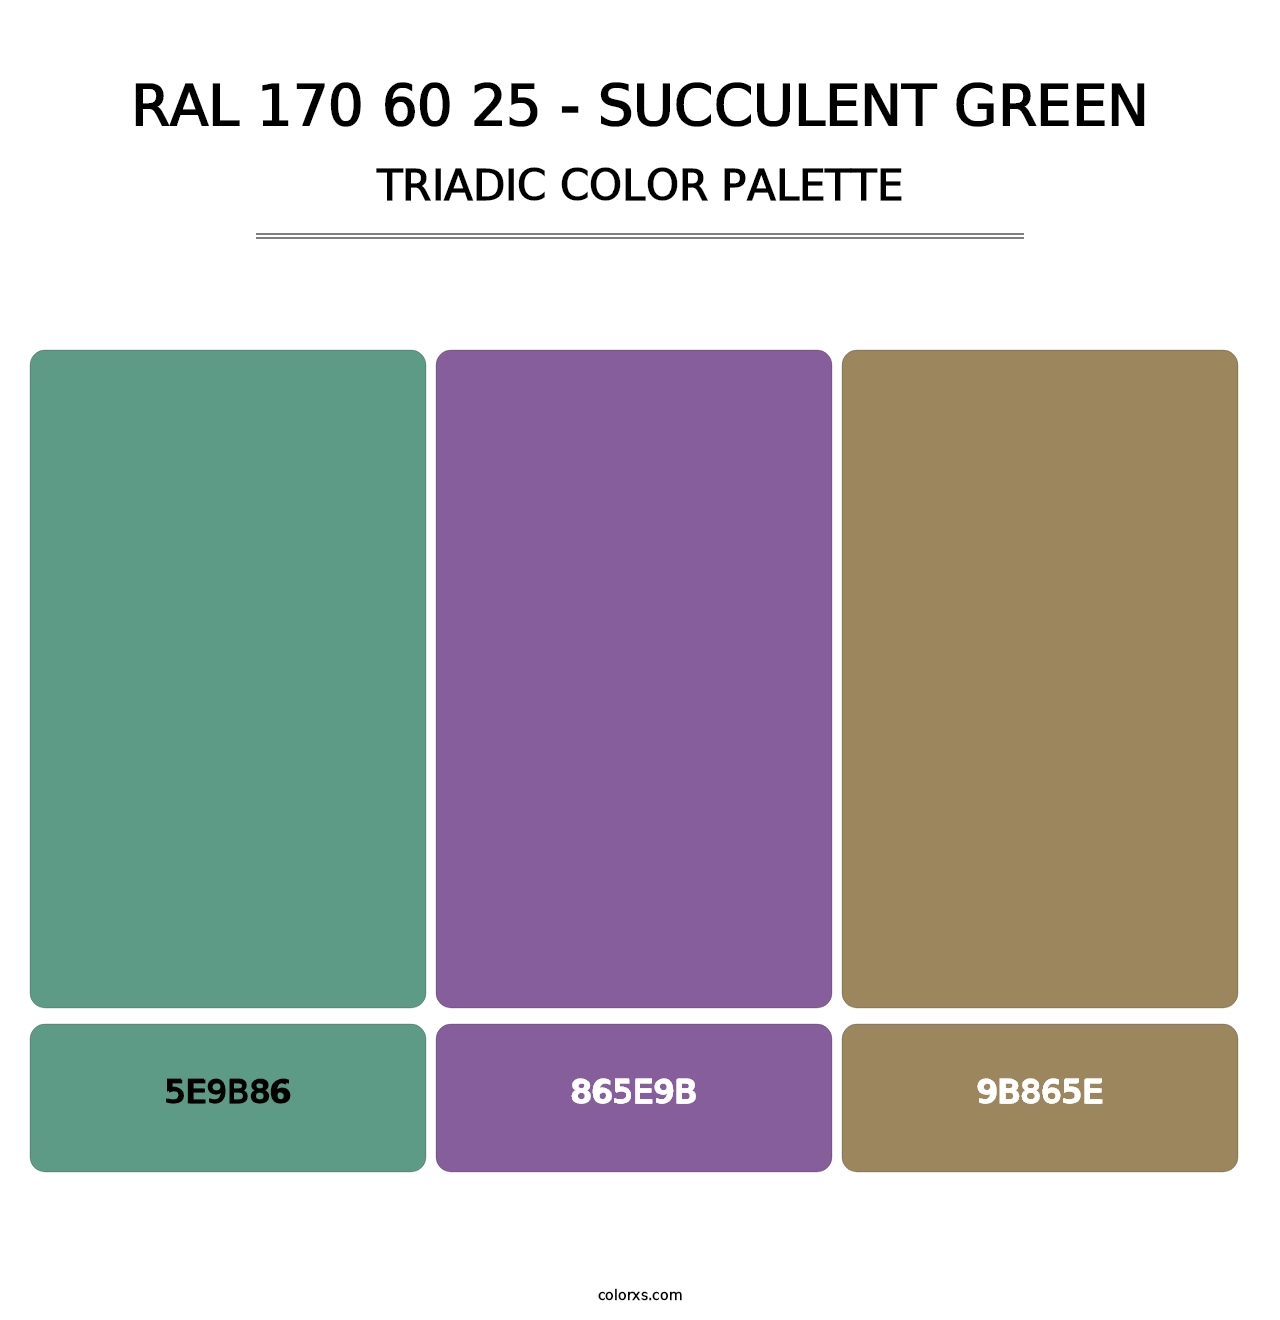 RAL 170 60 25 - Succulent Green - Triadic Color Palette